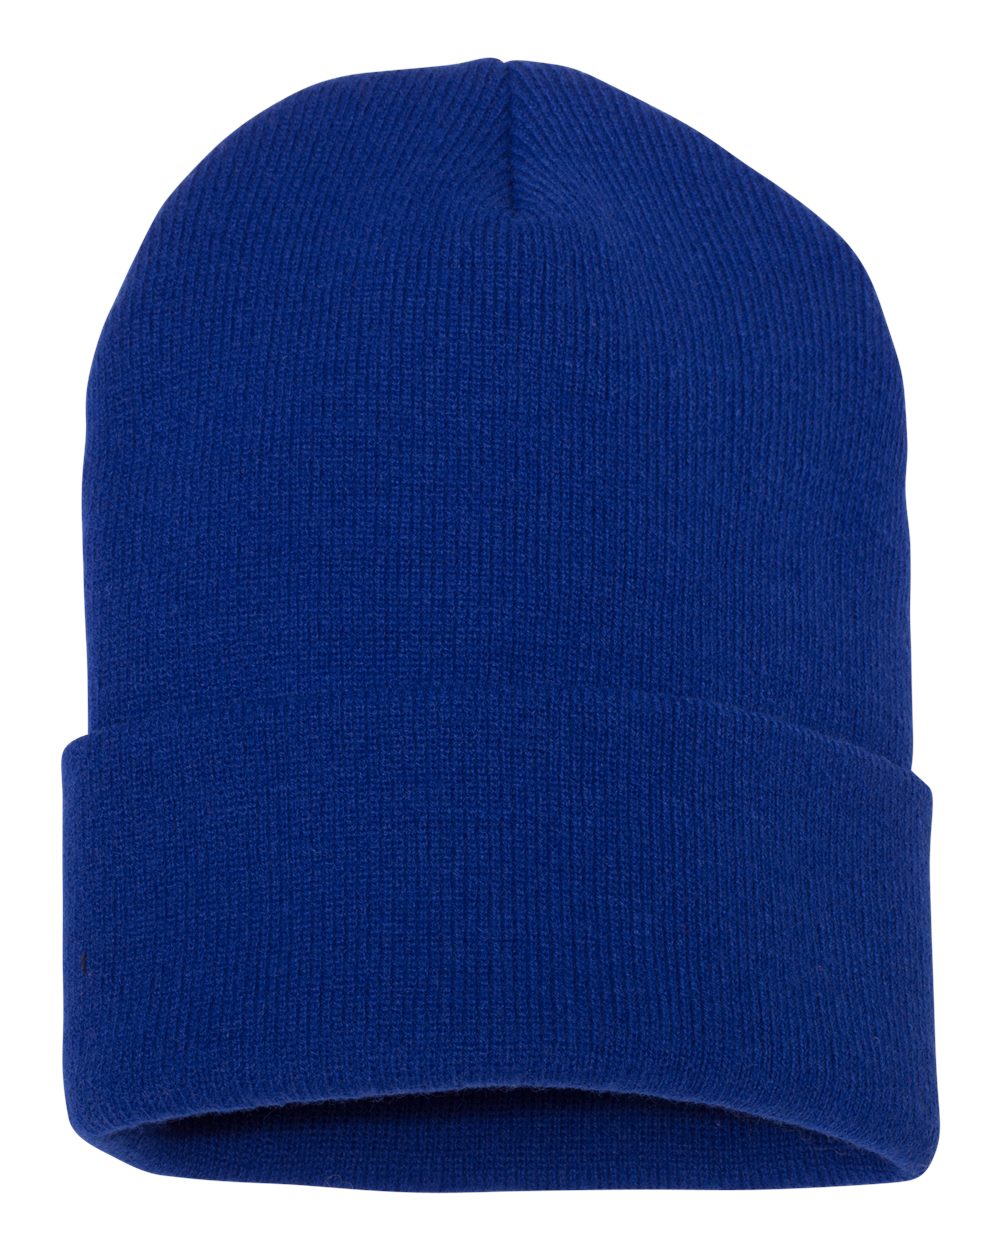 Cuffed Beanie with Leather Patch